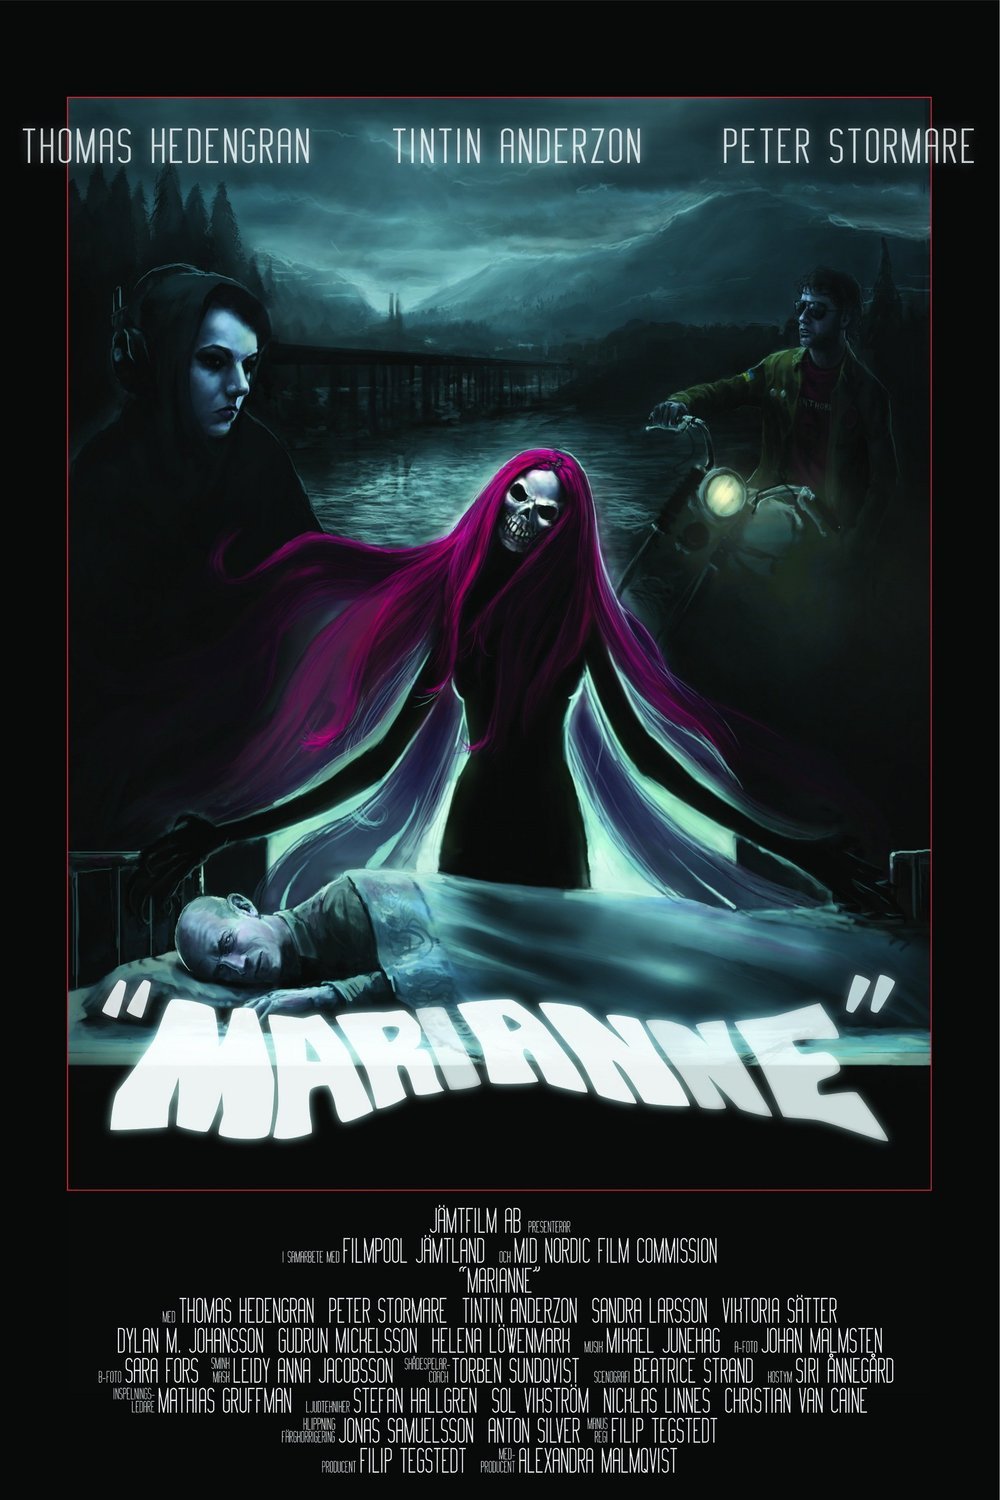 Swedish poster of the movie Marianne